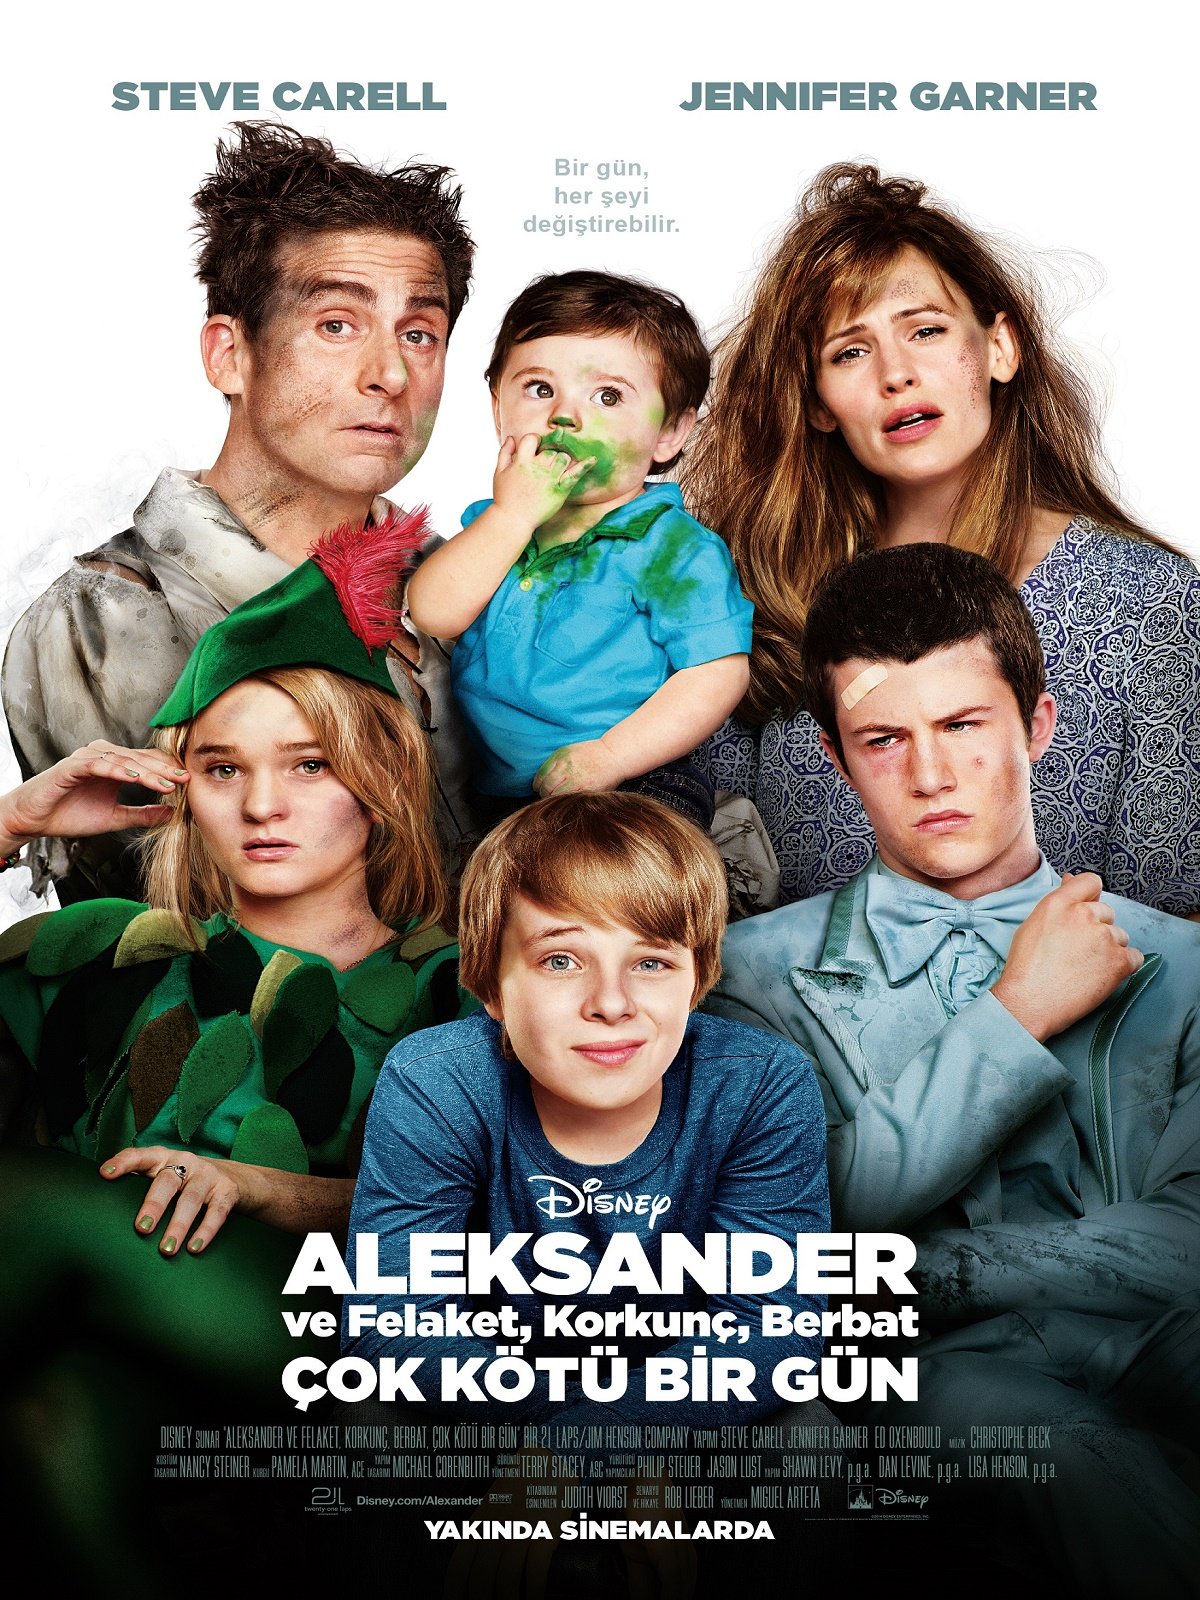 Alexander and the Terrible, Horrible, No Good, Very Bad Day (2014) 256Kbps 23.976Fps 48Khz 5.1Ch Disney+ DD+ E-AC3 Turkish Audio TAC